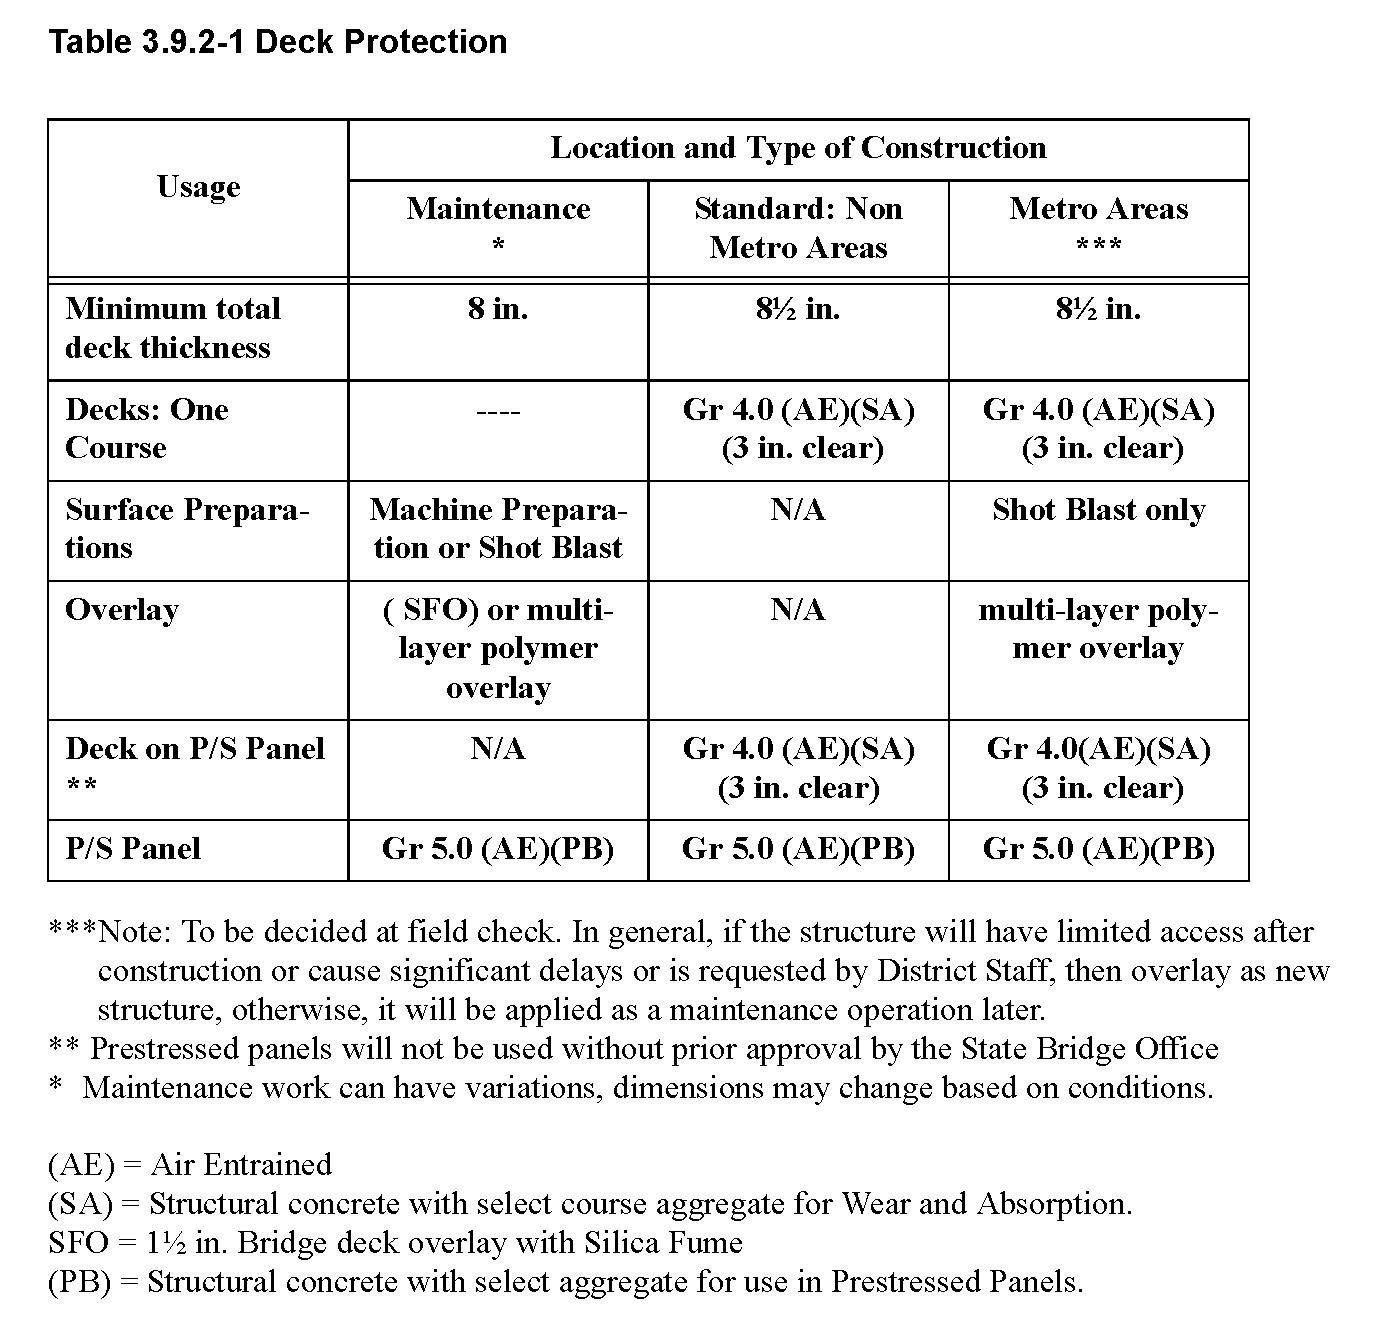 Table 3.9.2-1 Deck Protection